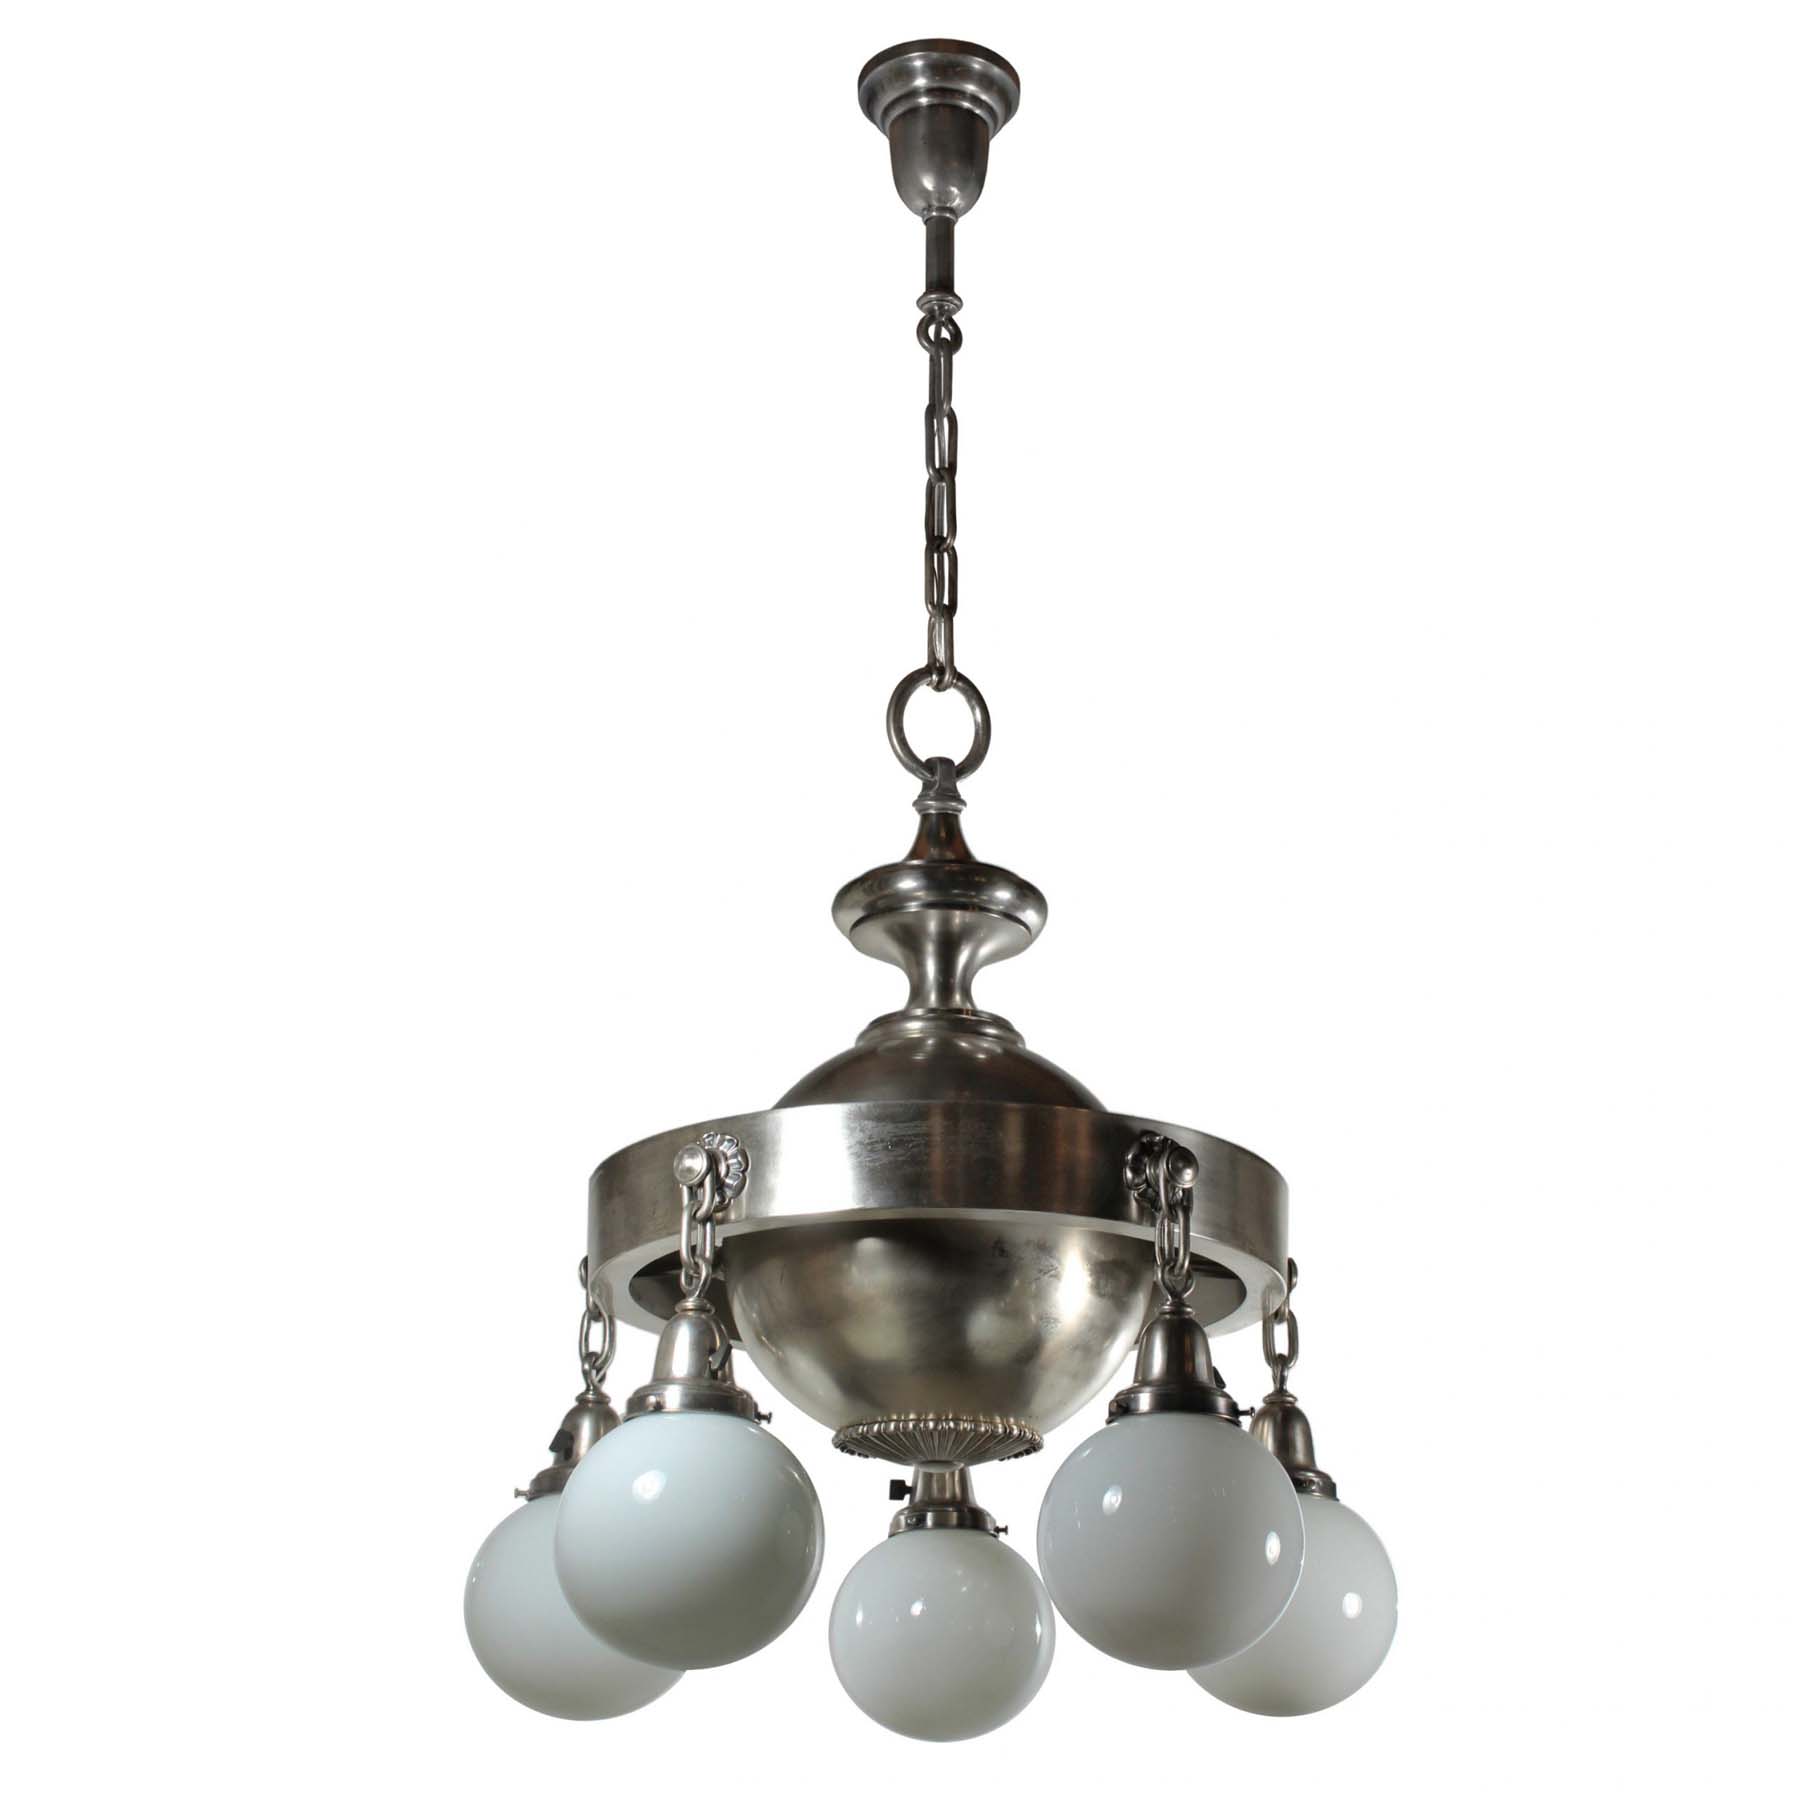 SOLD Substantial Antique Silver Plated Chandelier with Ball Shades-69821